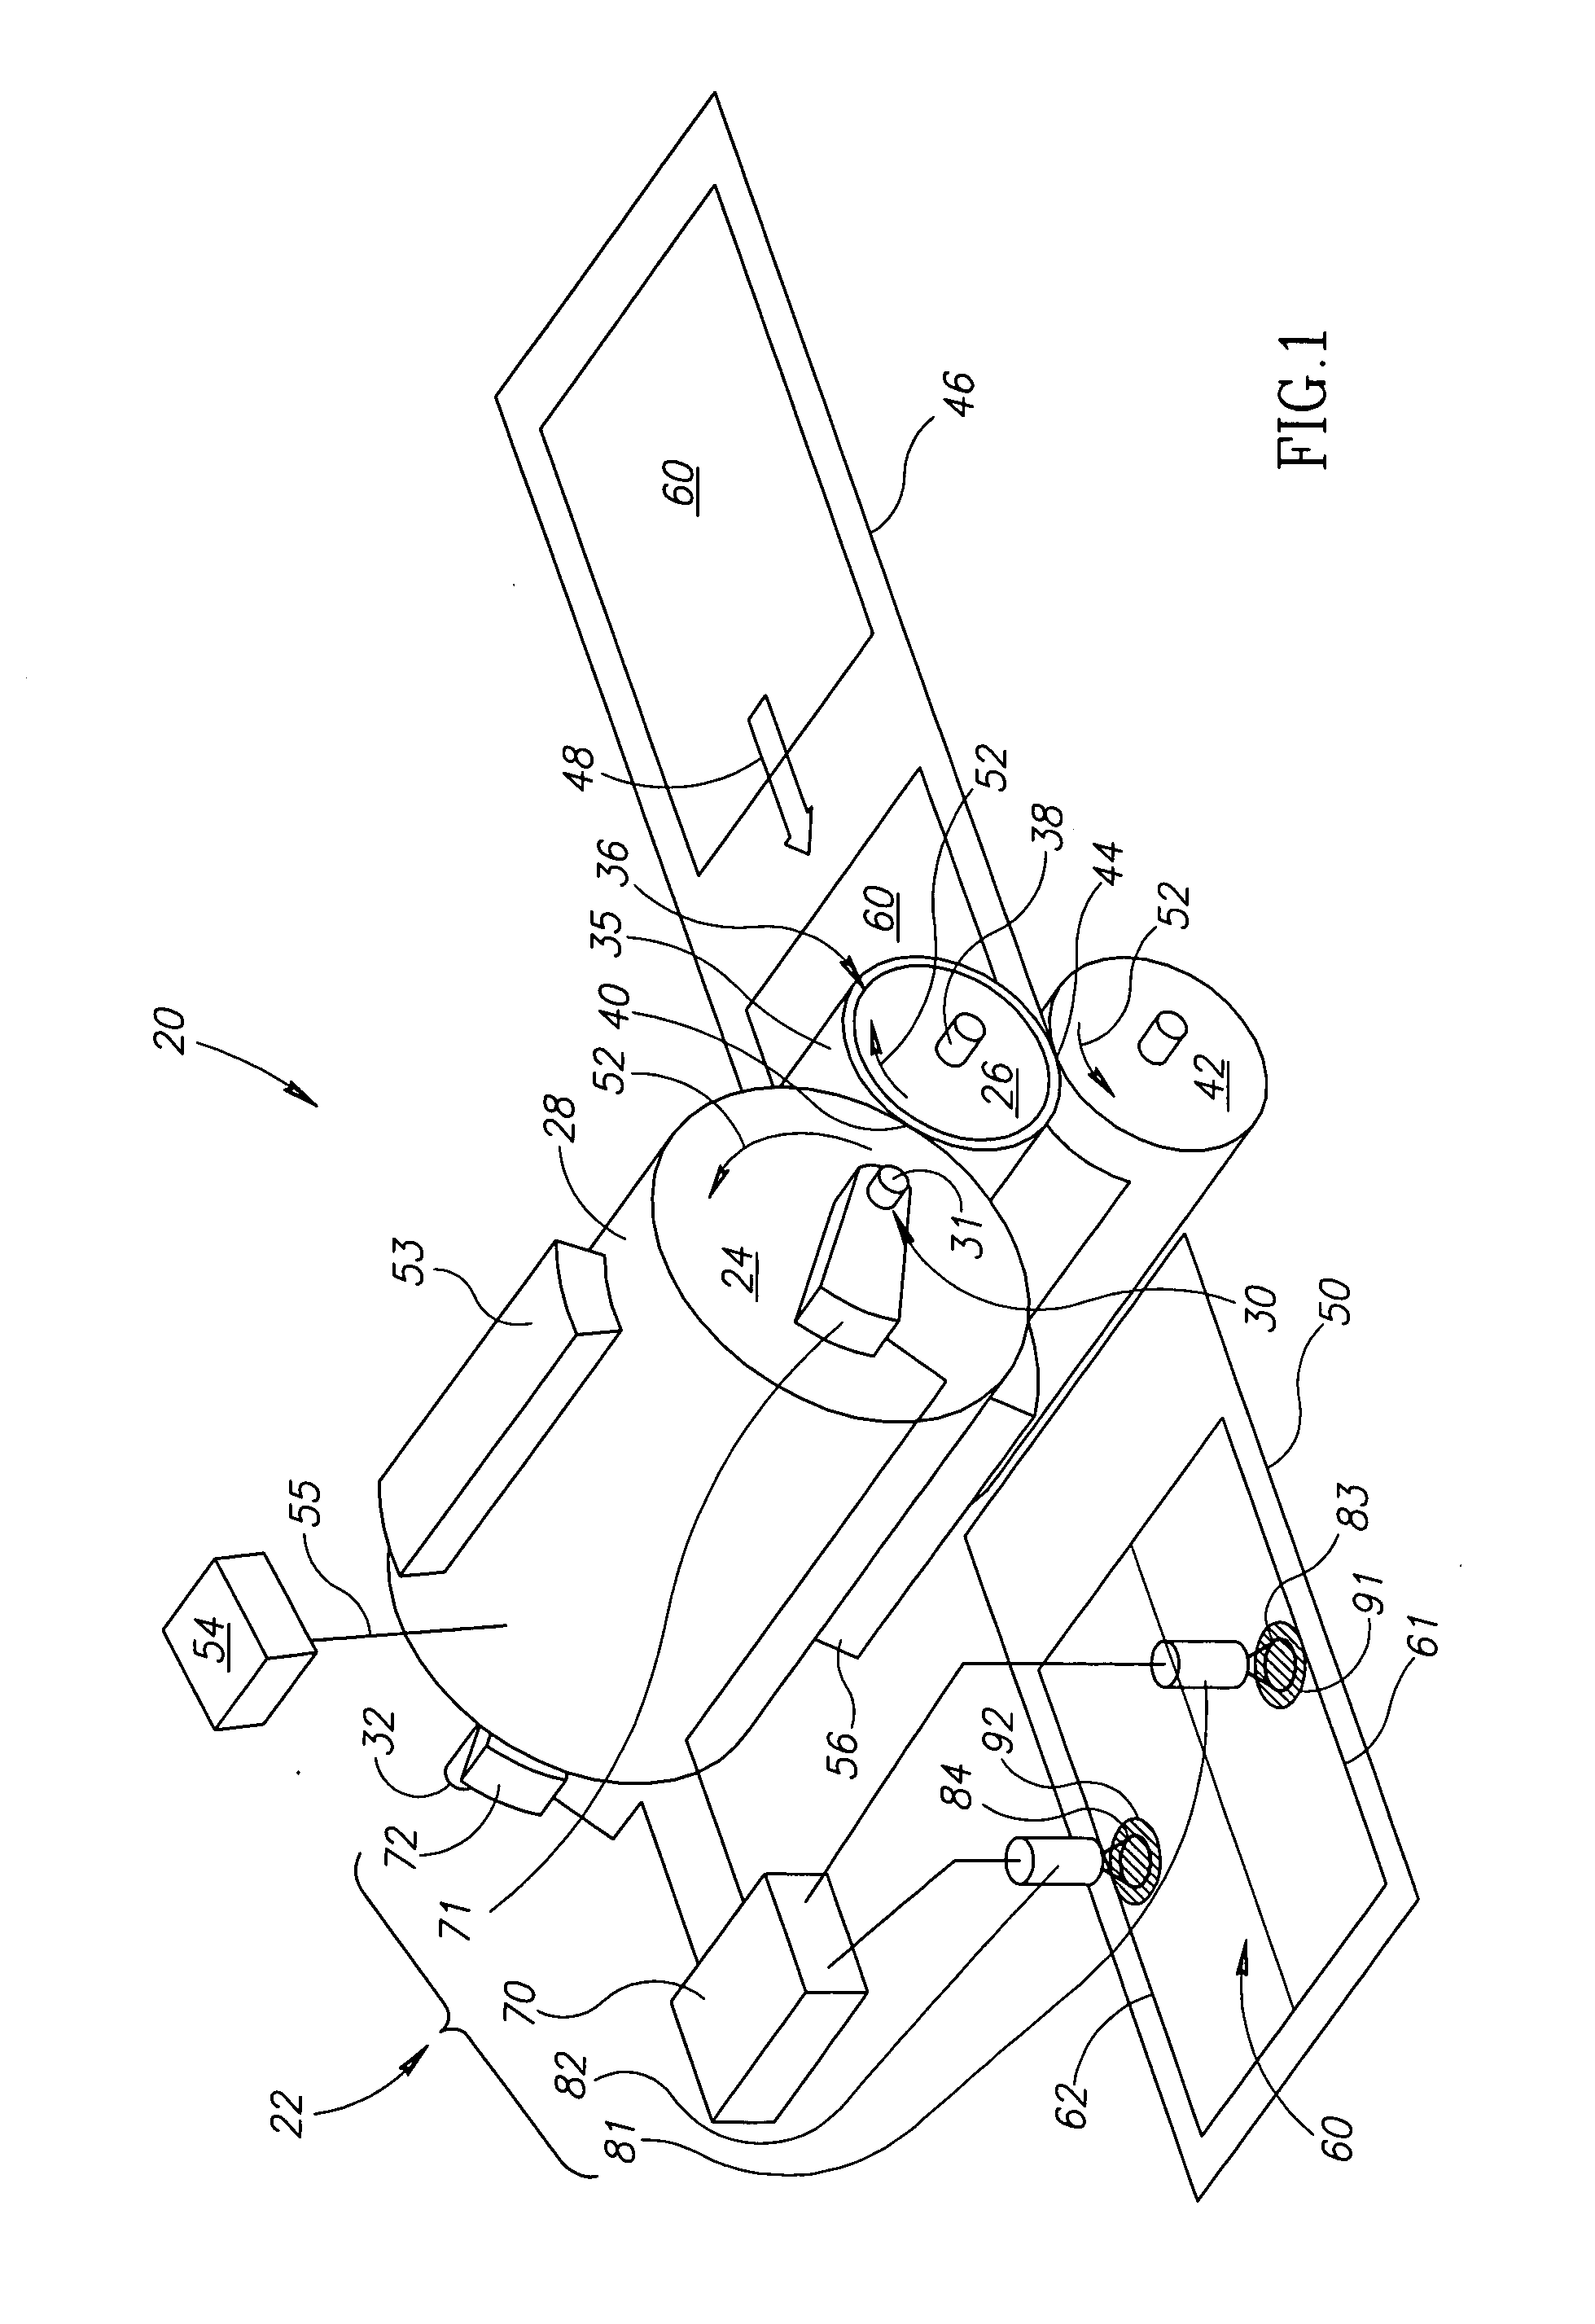 Method and apparatus for equalizing pressure between rollers in a printing press